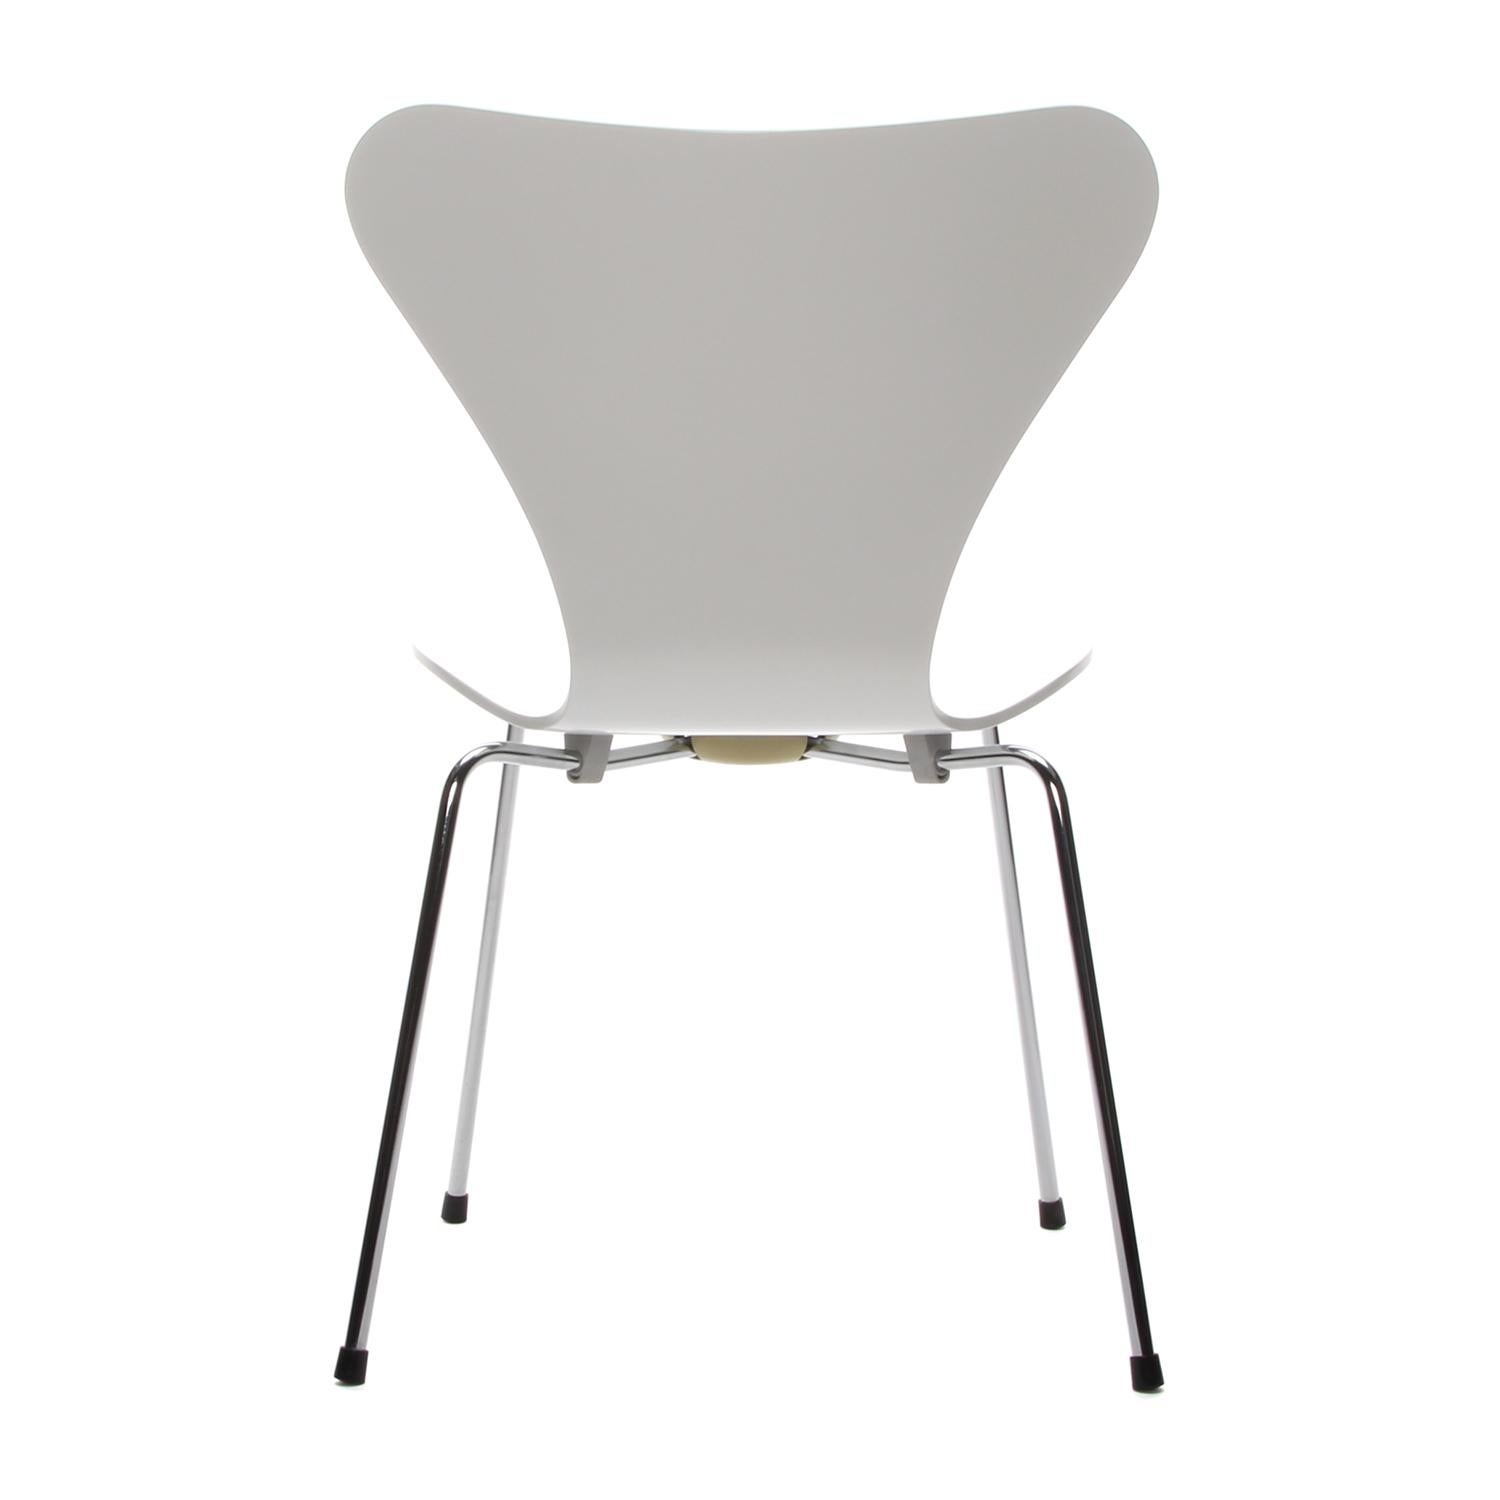 Lacquered Series 7 White Chair by Arne Jacobsen for Fritz Hansen in 1955